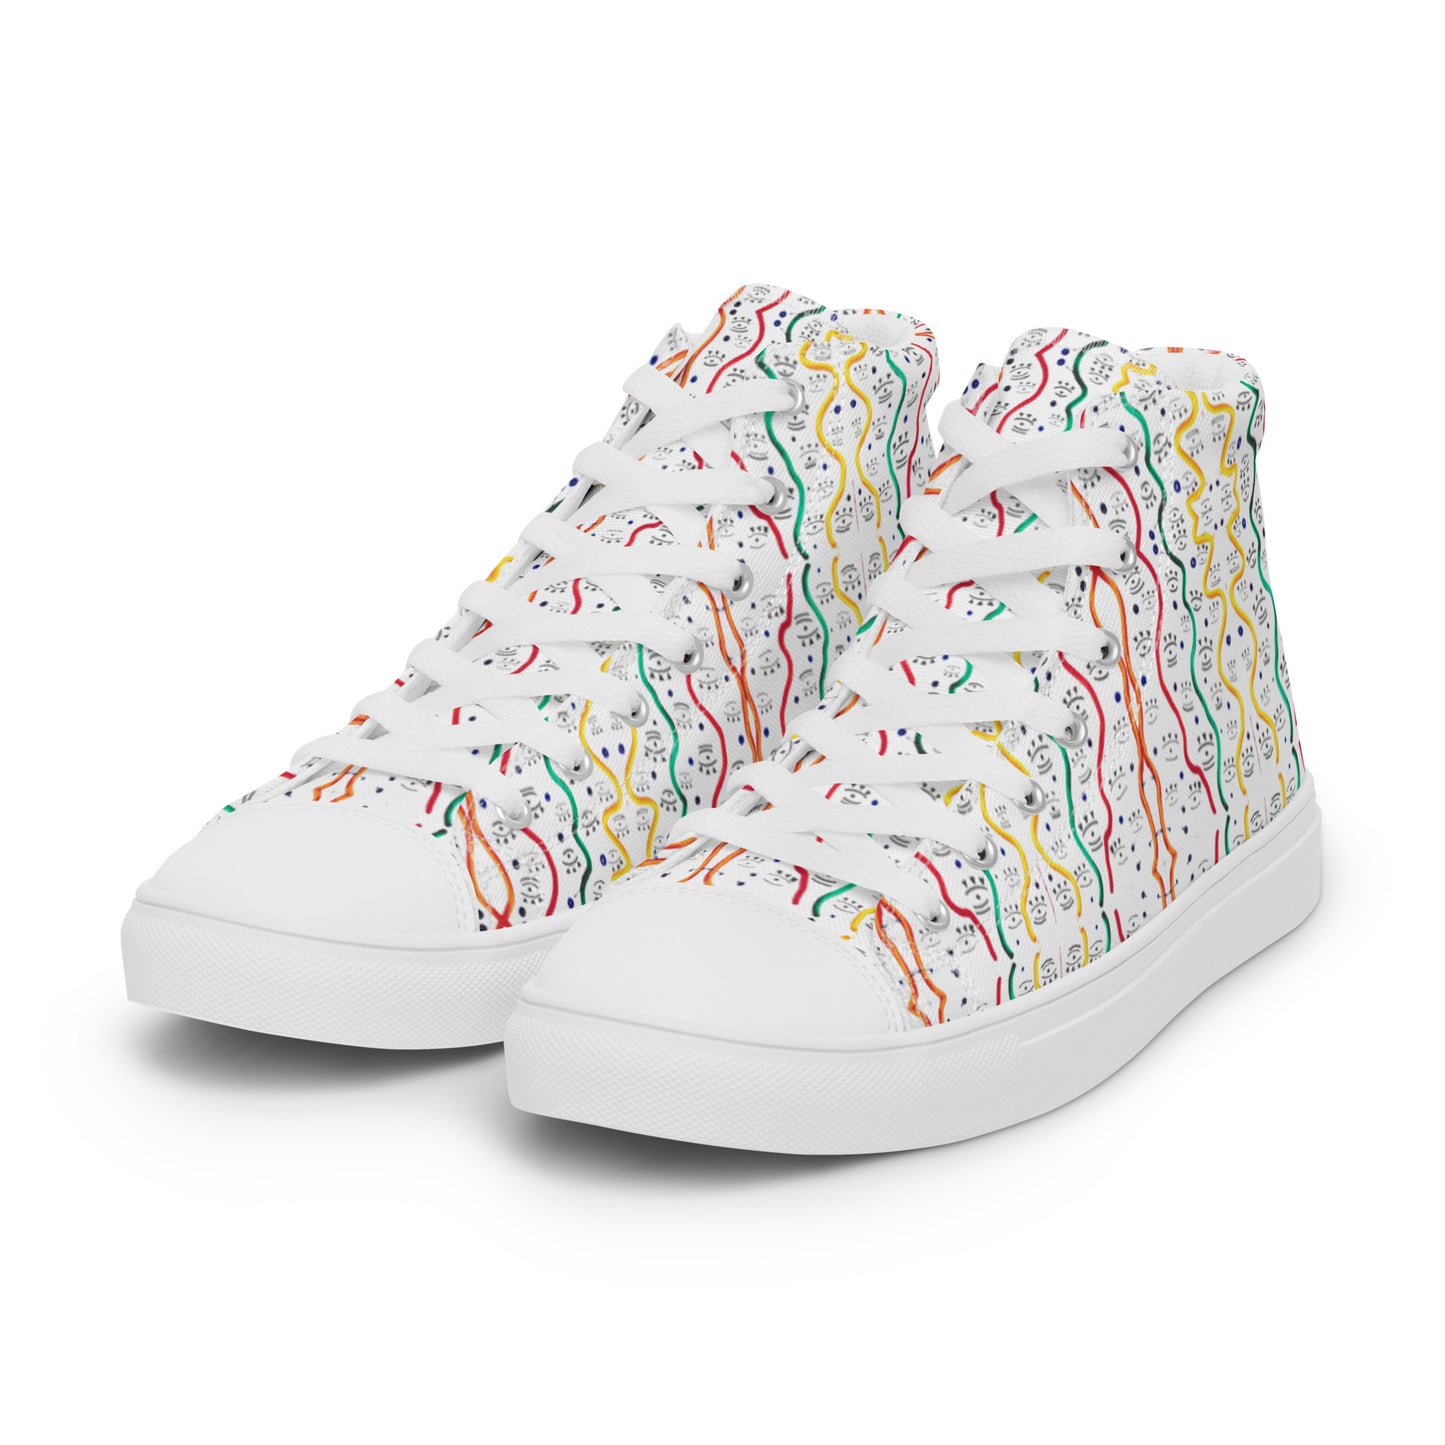 THE EYE - Women's high-top canvas trainers